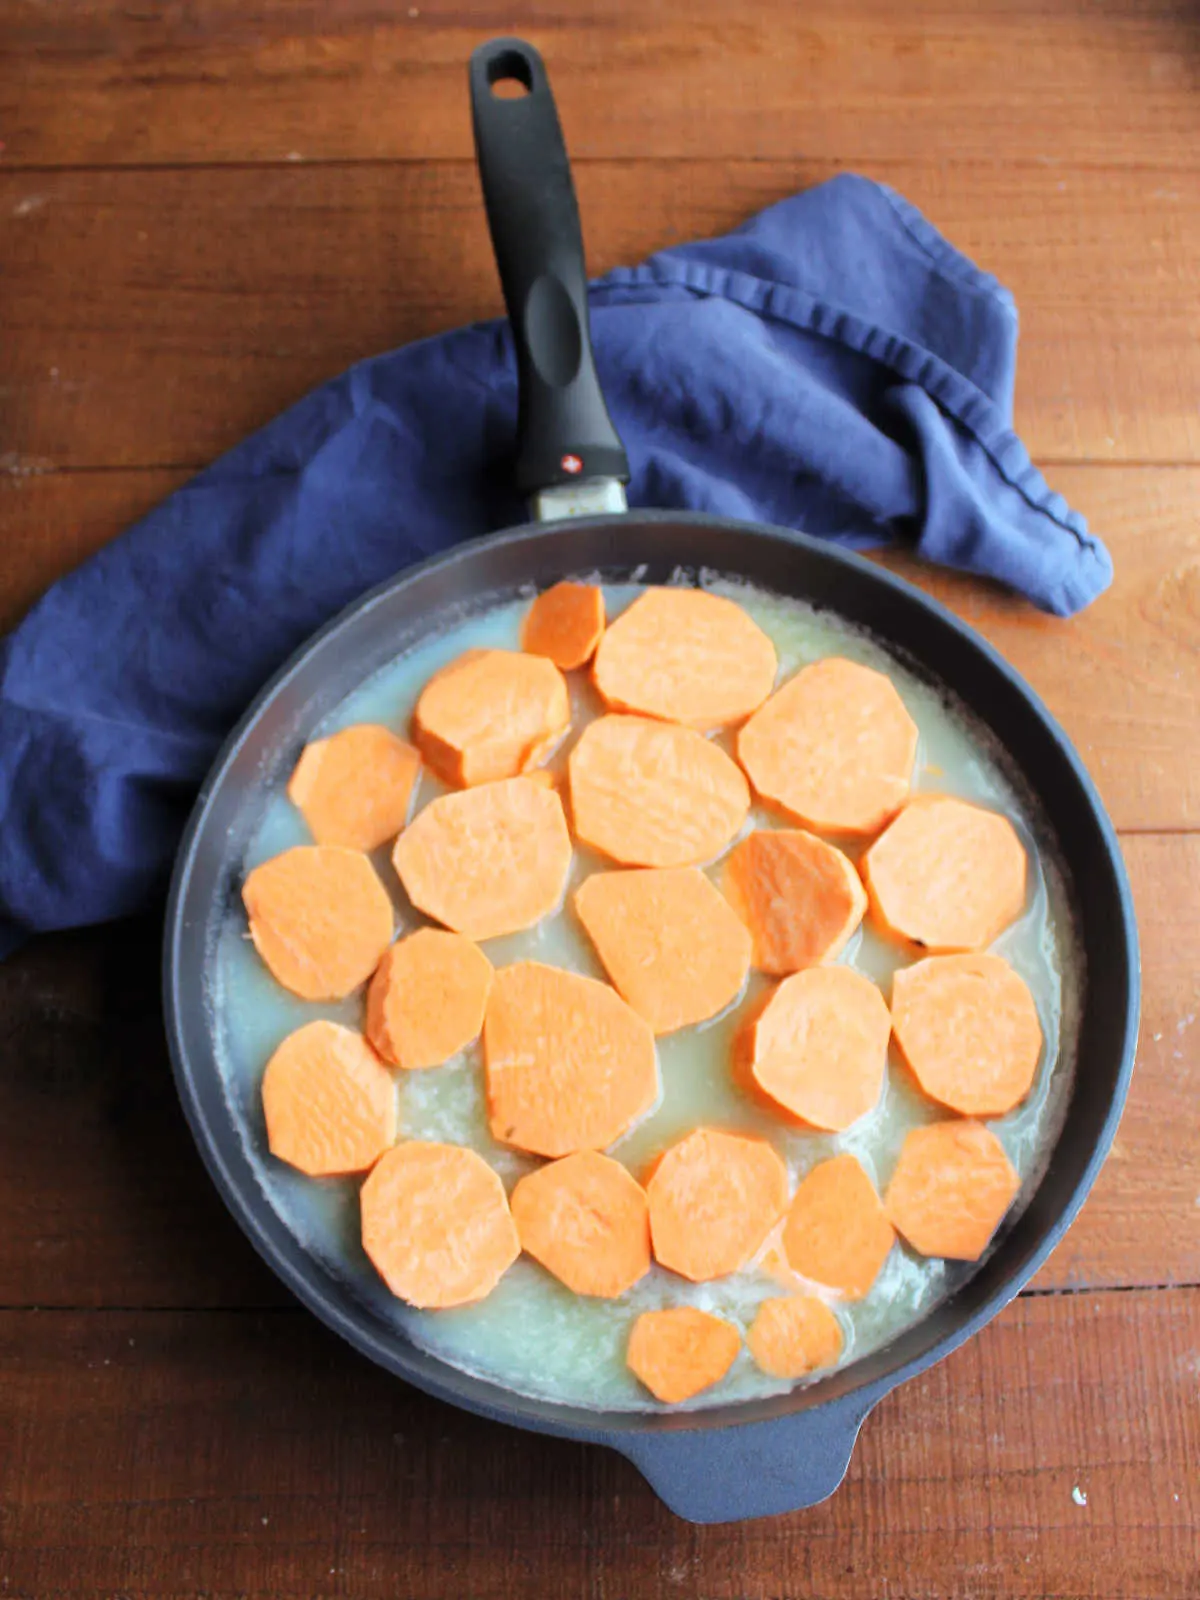 Thick slices of sweet potato in skillet with syrup, ready to cook.